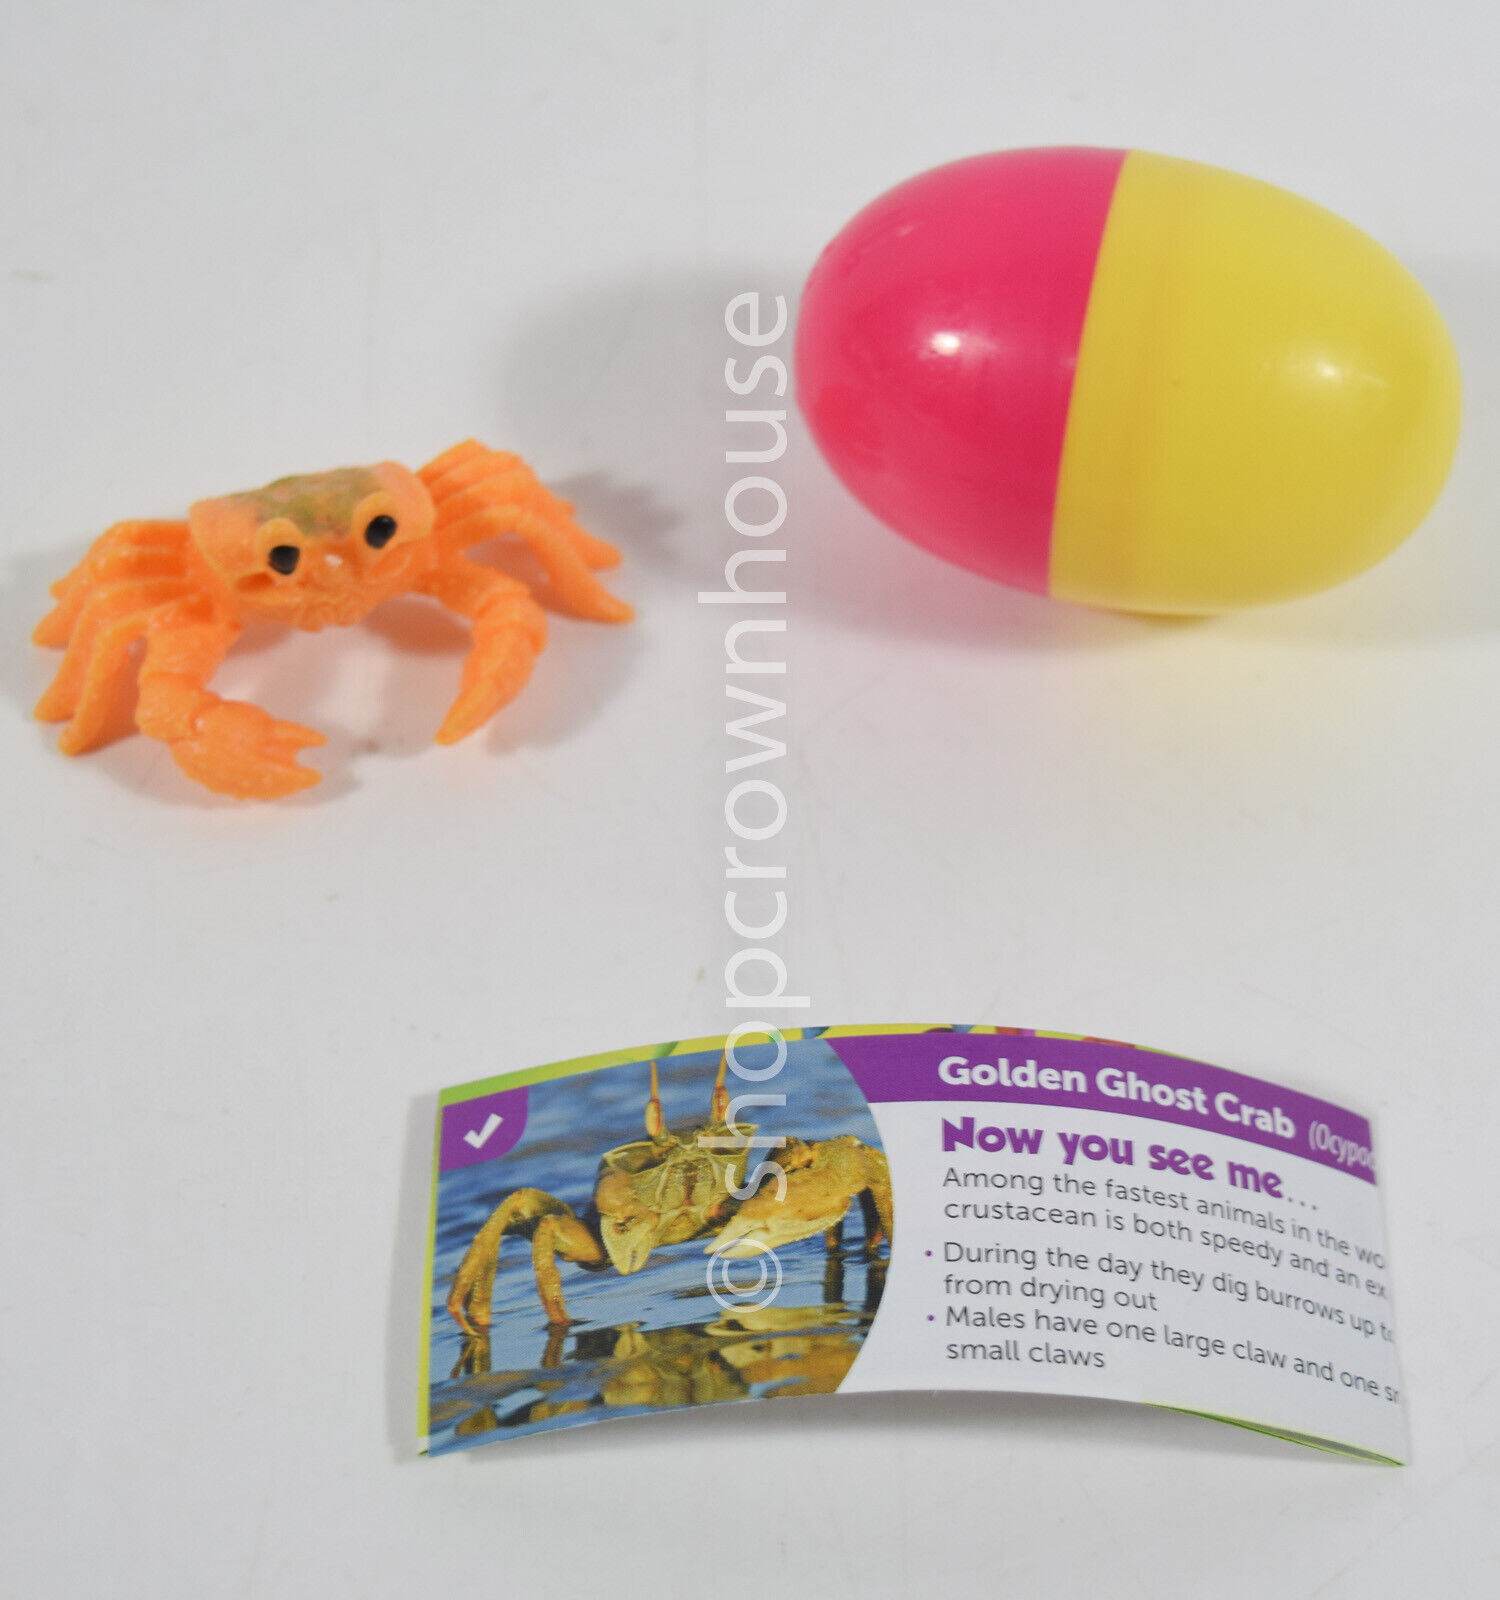 1 Yowie Endangered Species Mini Collectible Figurine w/ Egg - GOLDEN GHOST CRAB